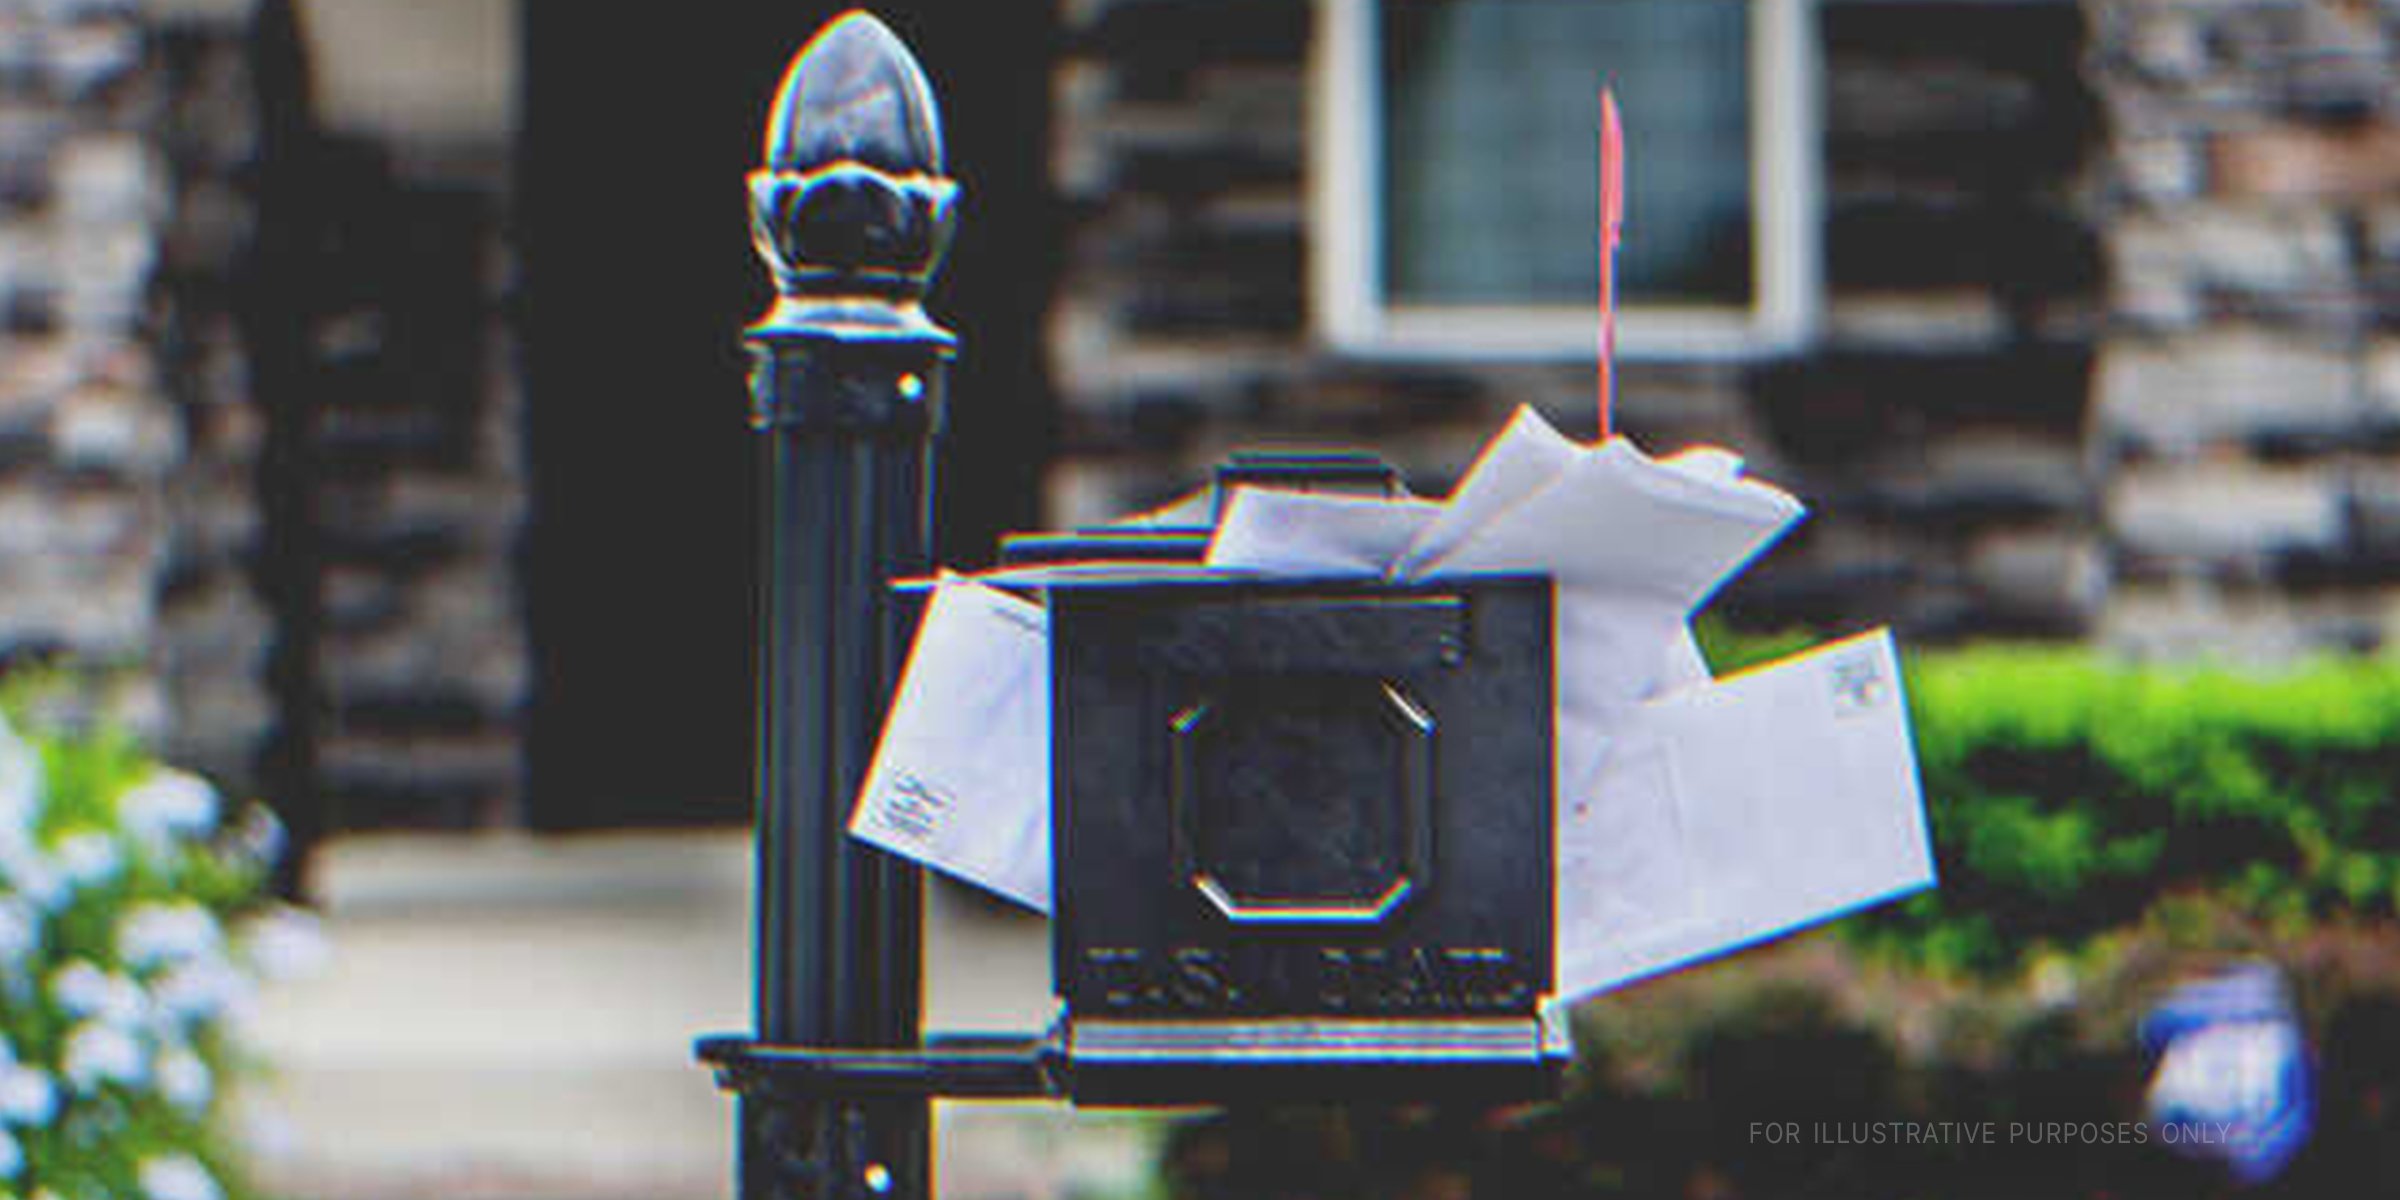 Mailbox overflowing with letters. | Source: Shutterstock